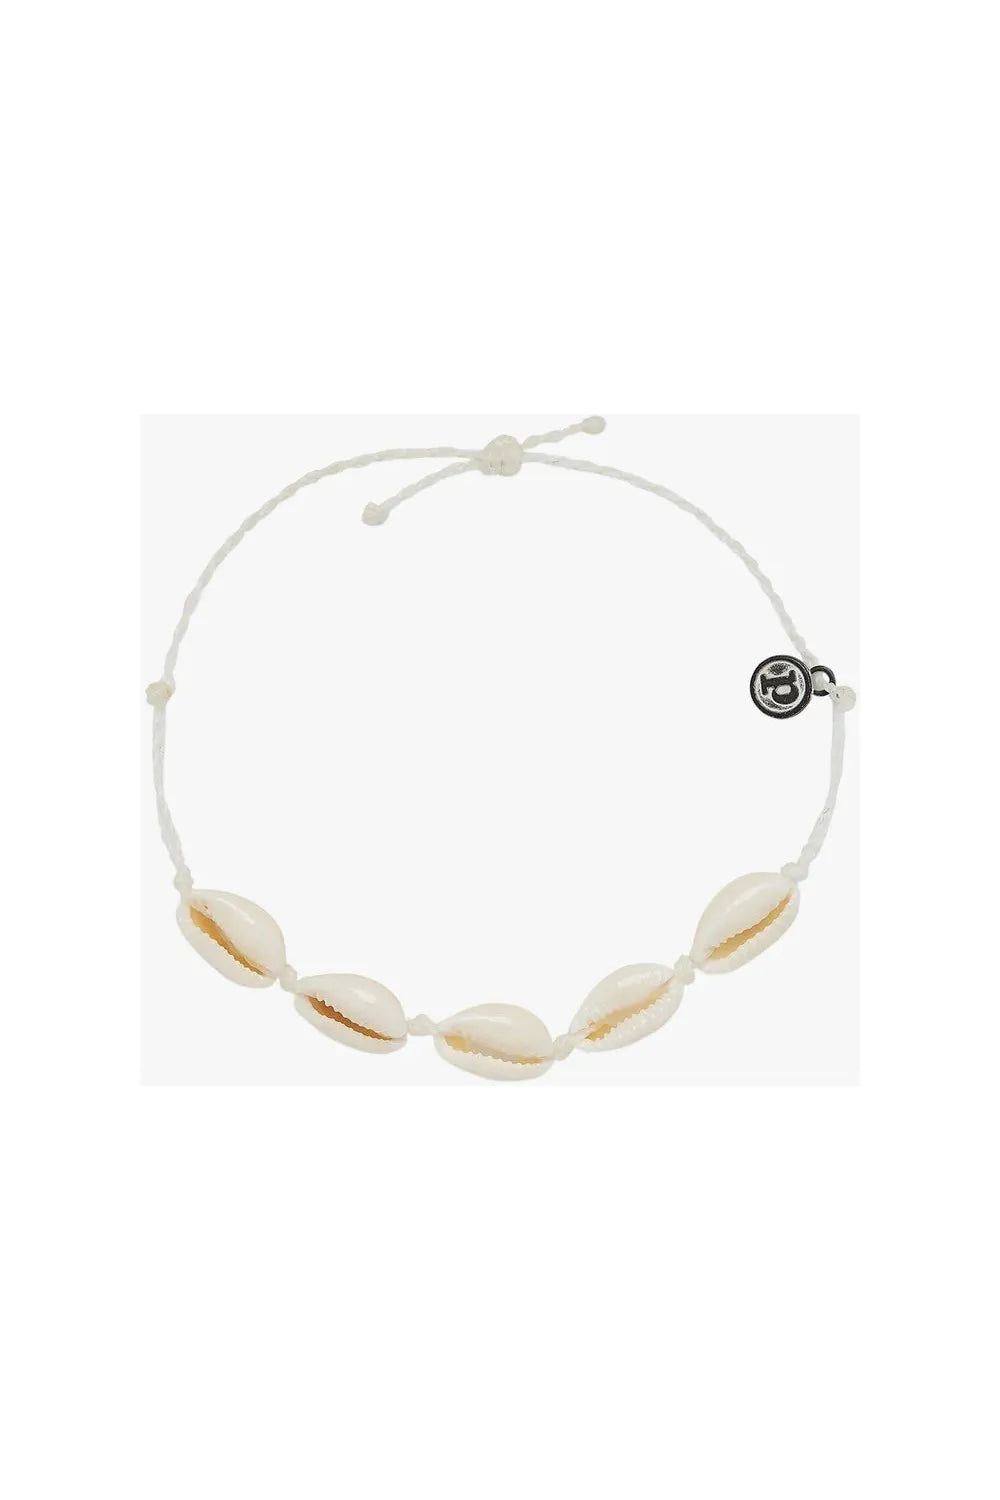 Pura Vida Knotted Cowries Anklet White